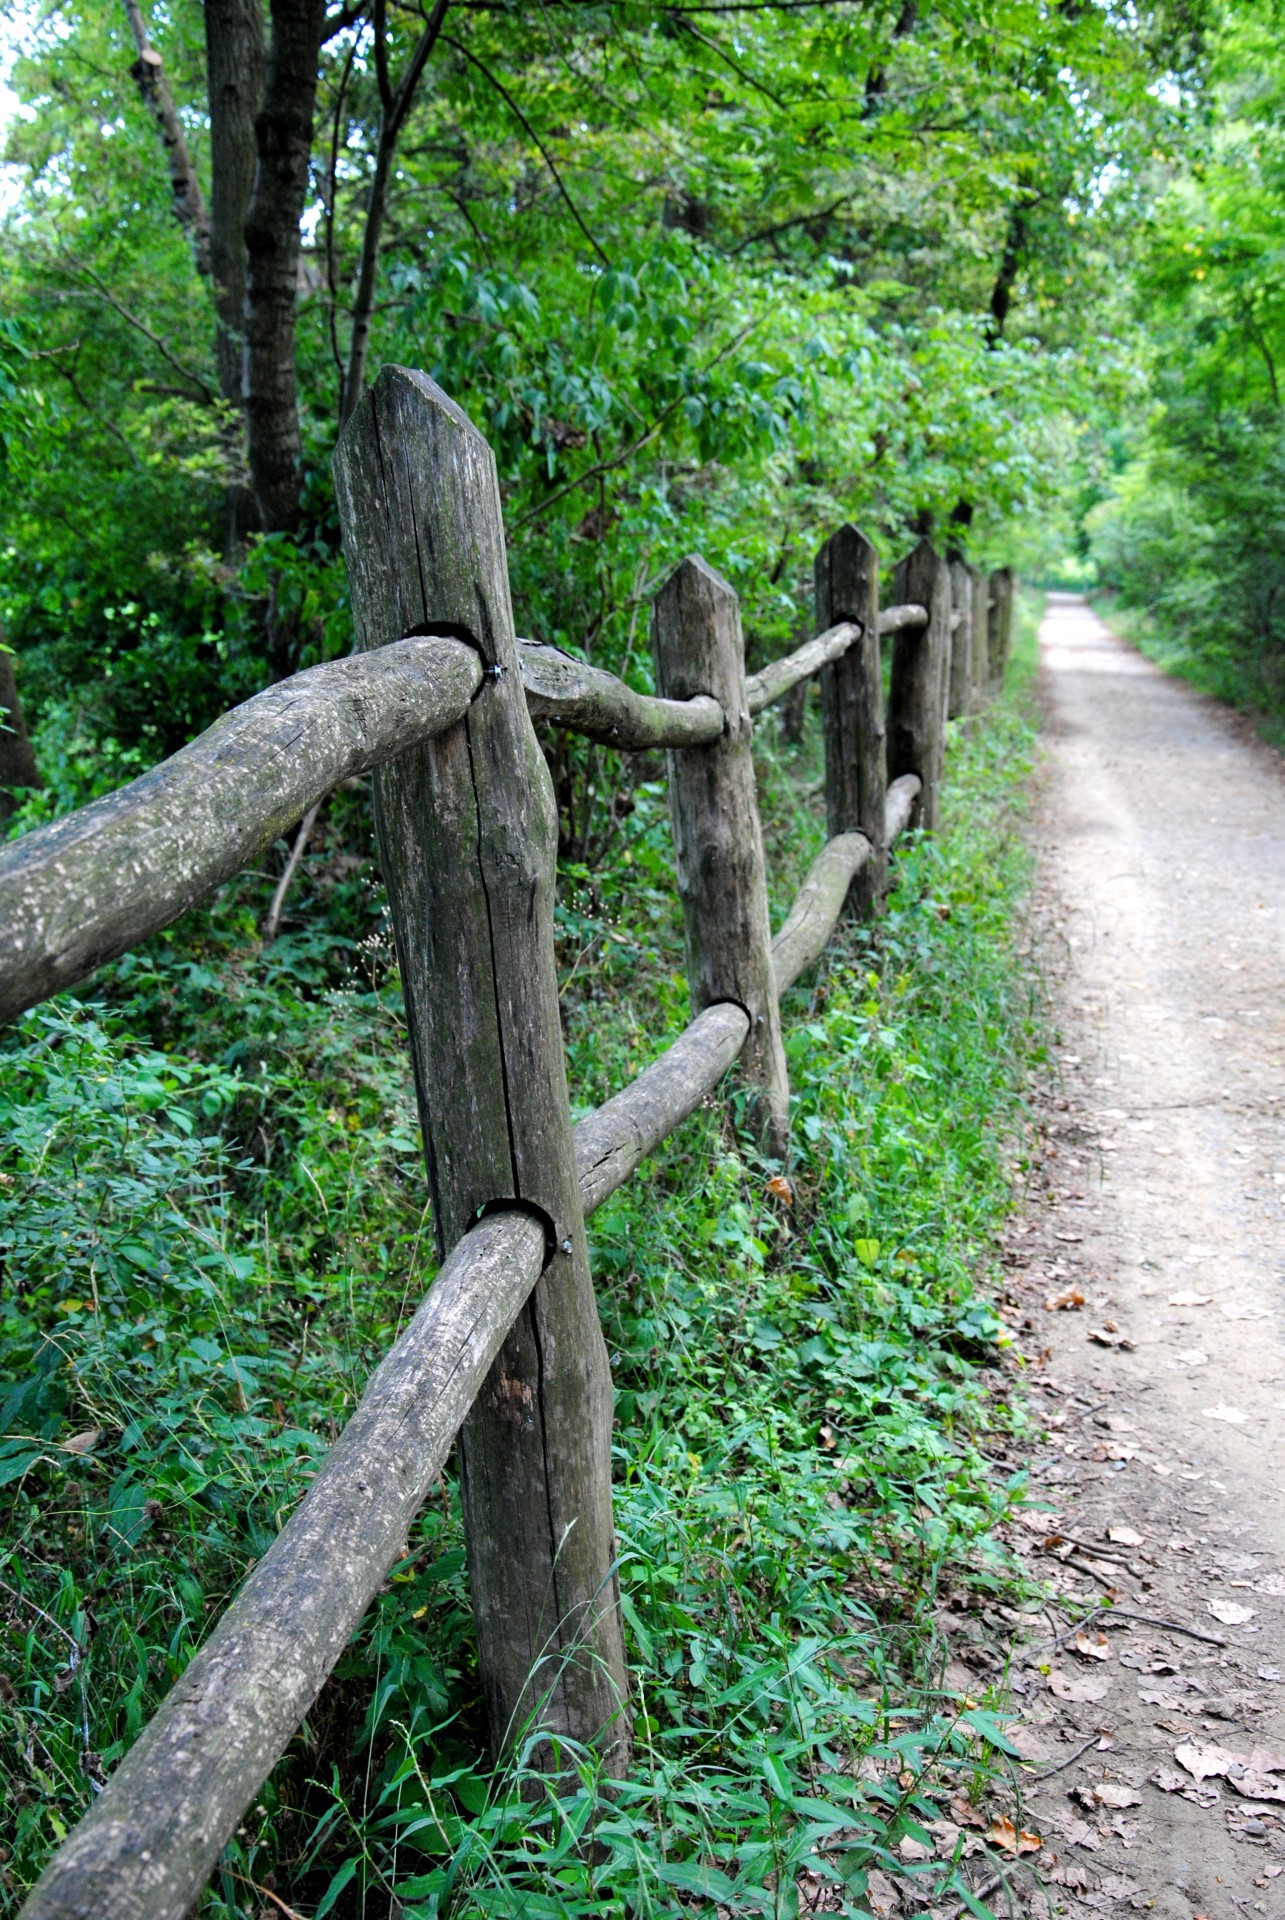 The lane road with wooden fence